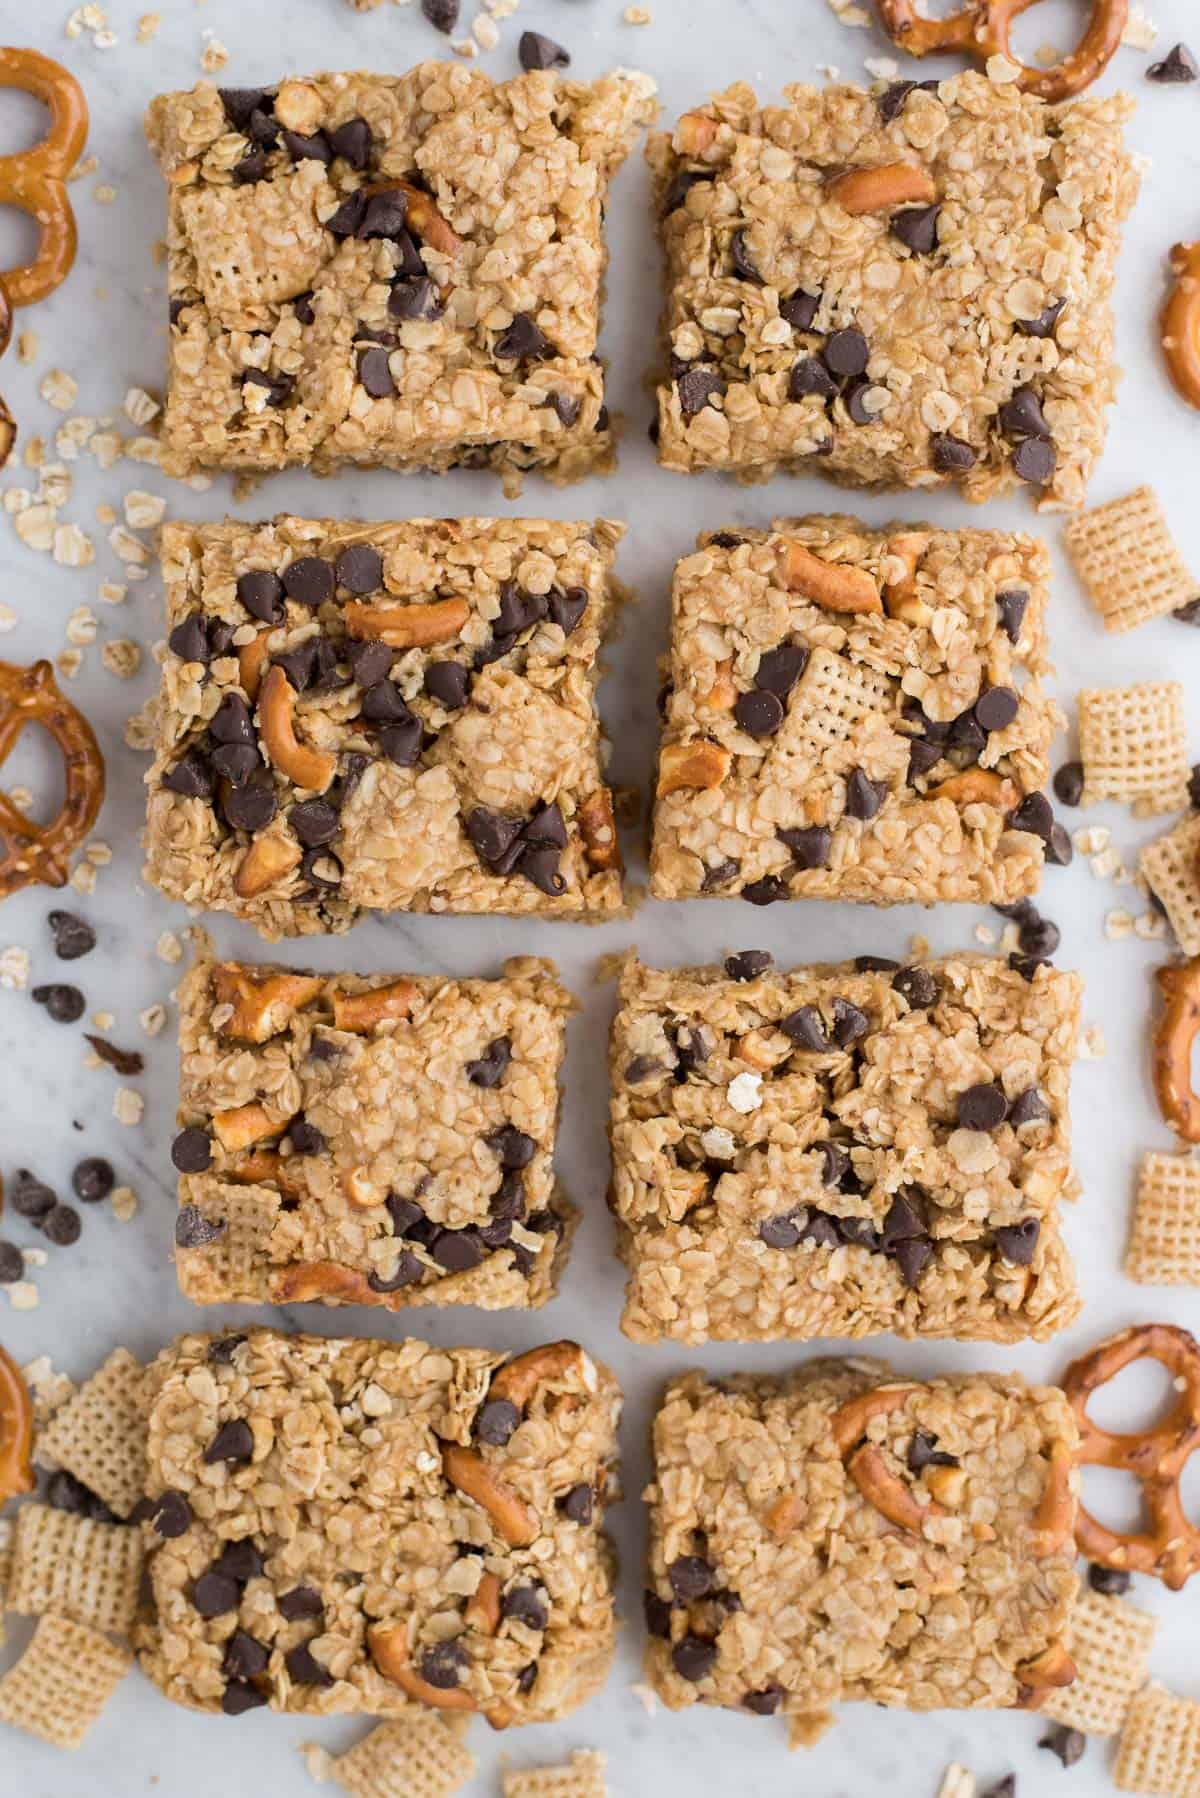 no bake granola bars in 2 rows on white background